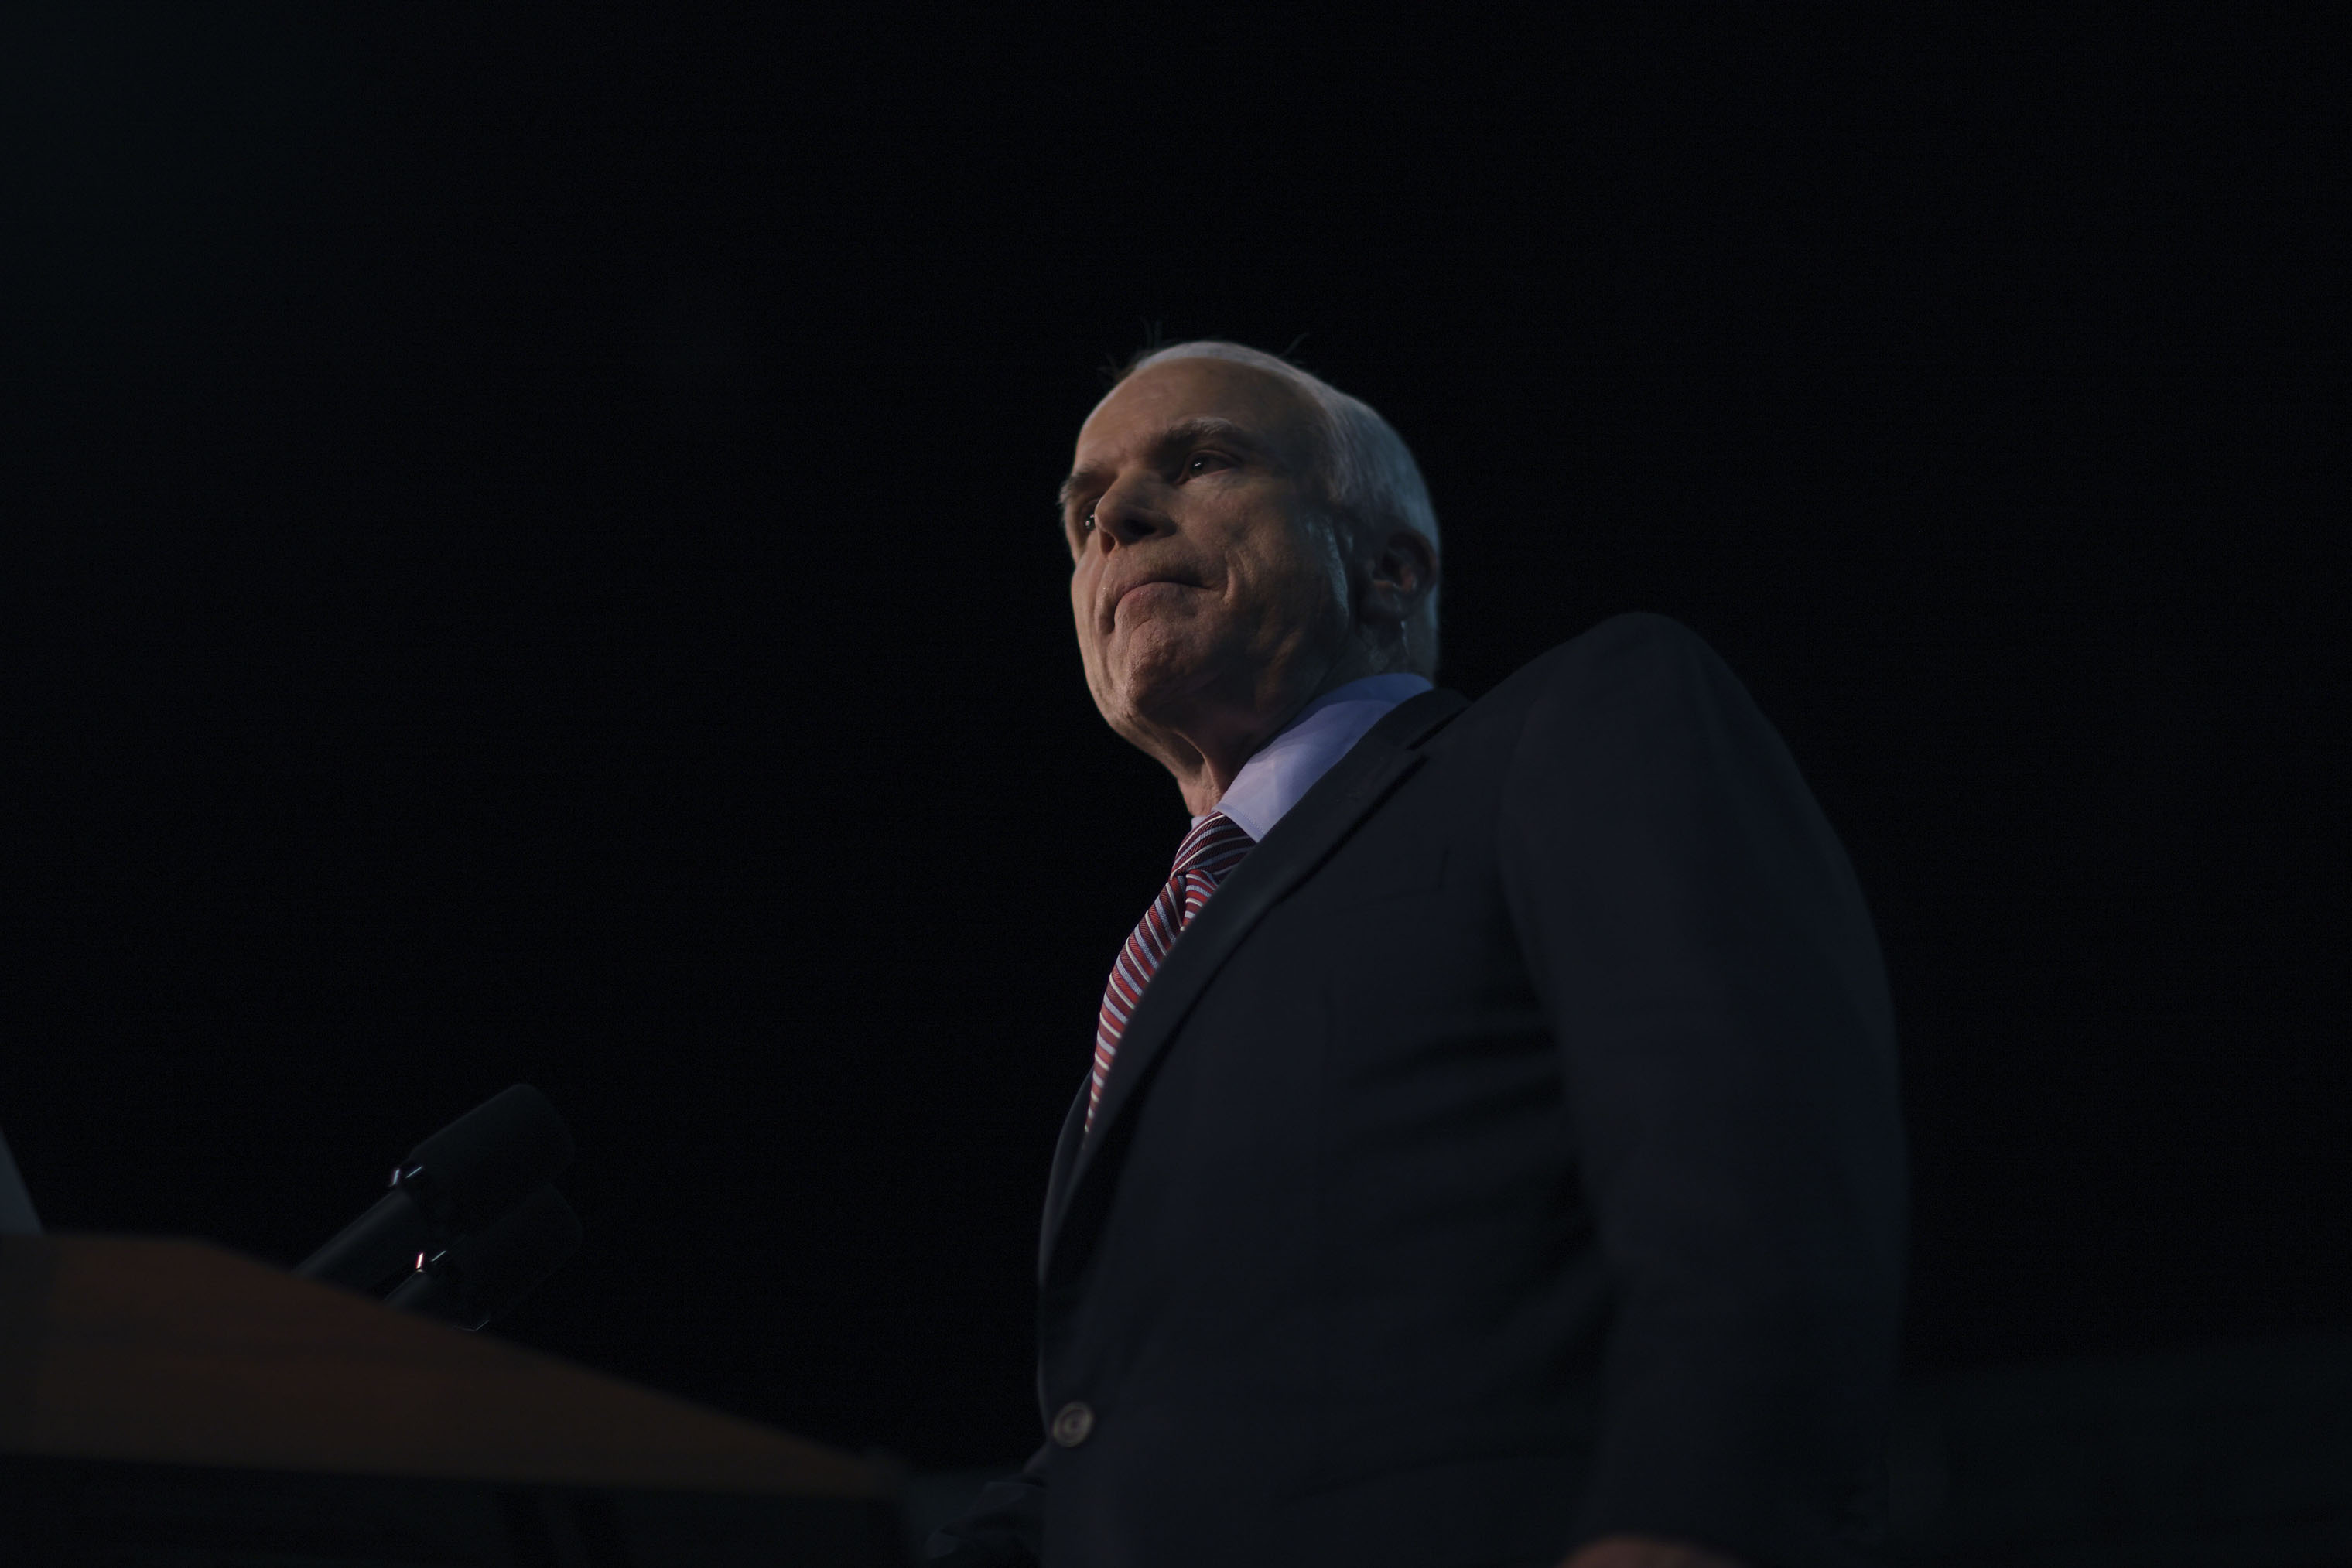 Republican presidential candidate Sen. John McCain speaks during a campaign event in Tampa, Fla. on Sept. 16, 2008. (Christopher Morris—VII/Redux)